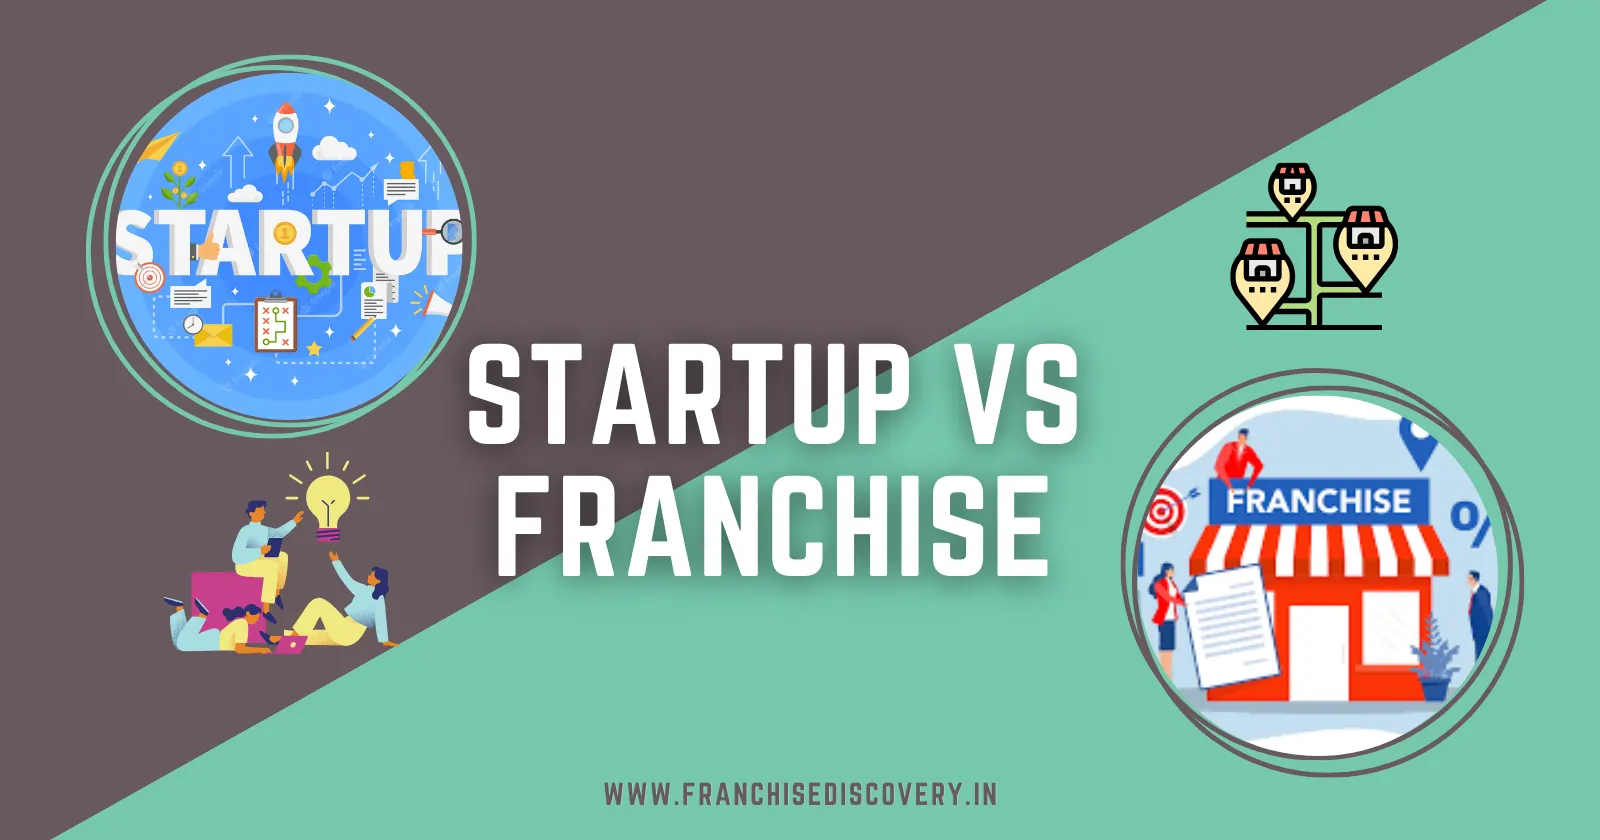 Franchise vs. Start-up: Which Is the Better Business Choice?